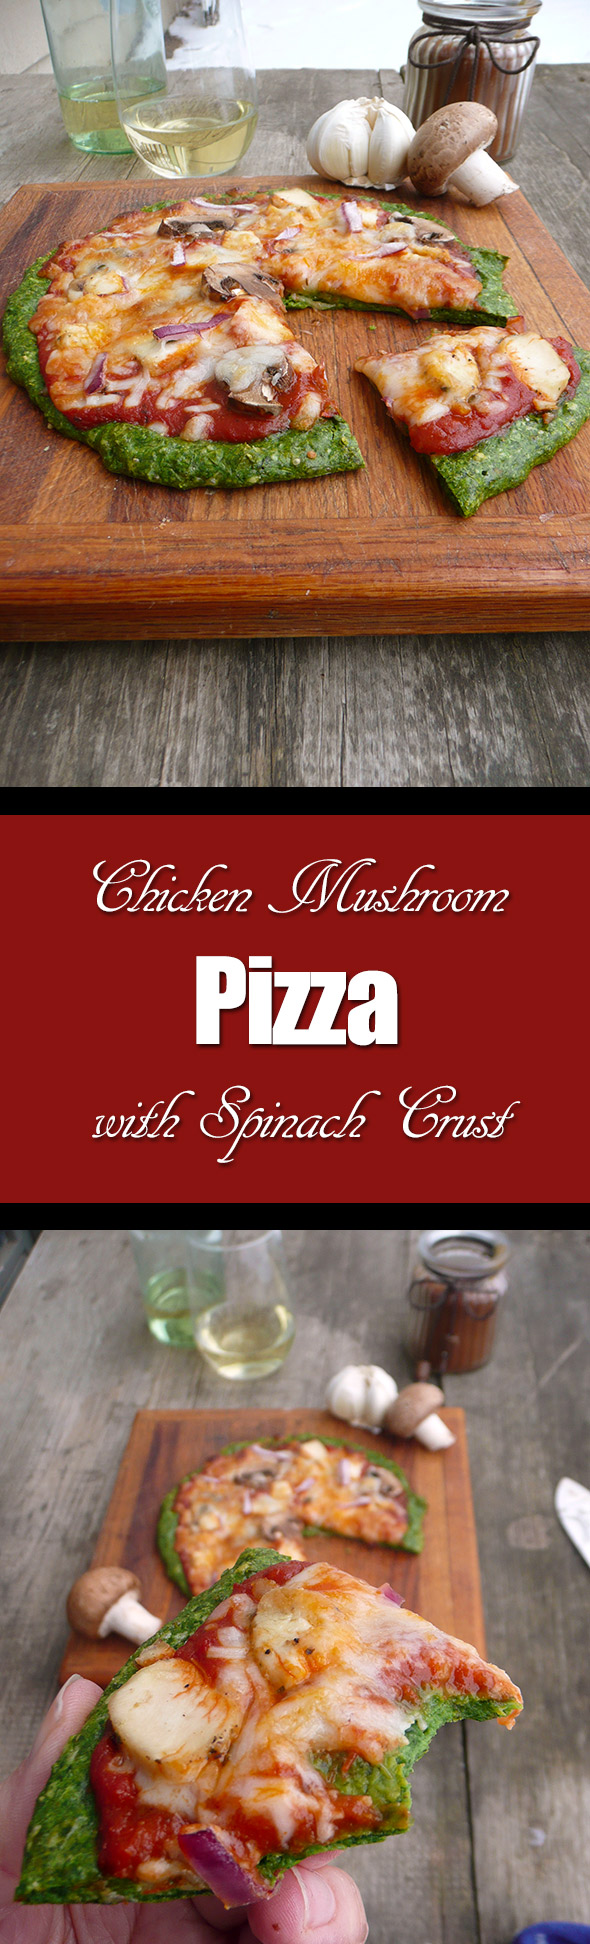 Chicken Mushroom Pizza with Spinach Crust ~ Sumptuous Spoonfuls #healthy #pizza #recipe #quick